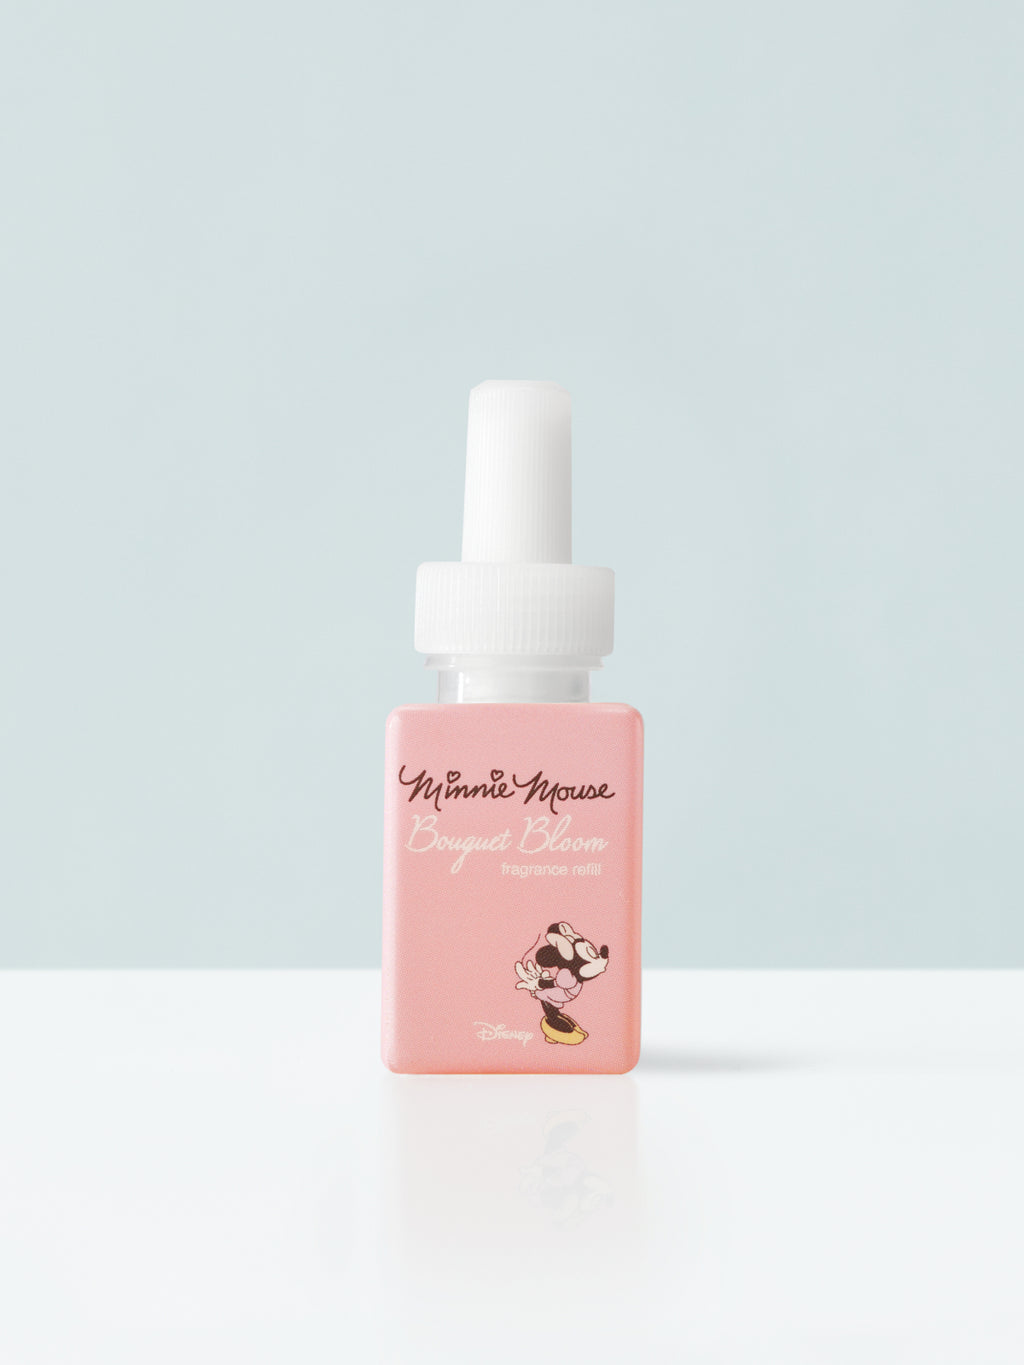 Minnie Mouse Bouquet Bloom Home Fragrance Diffuser Oil | Powered by Pura